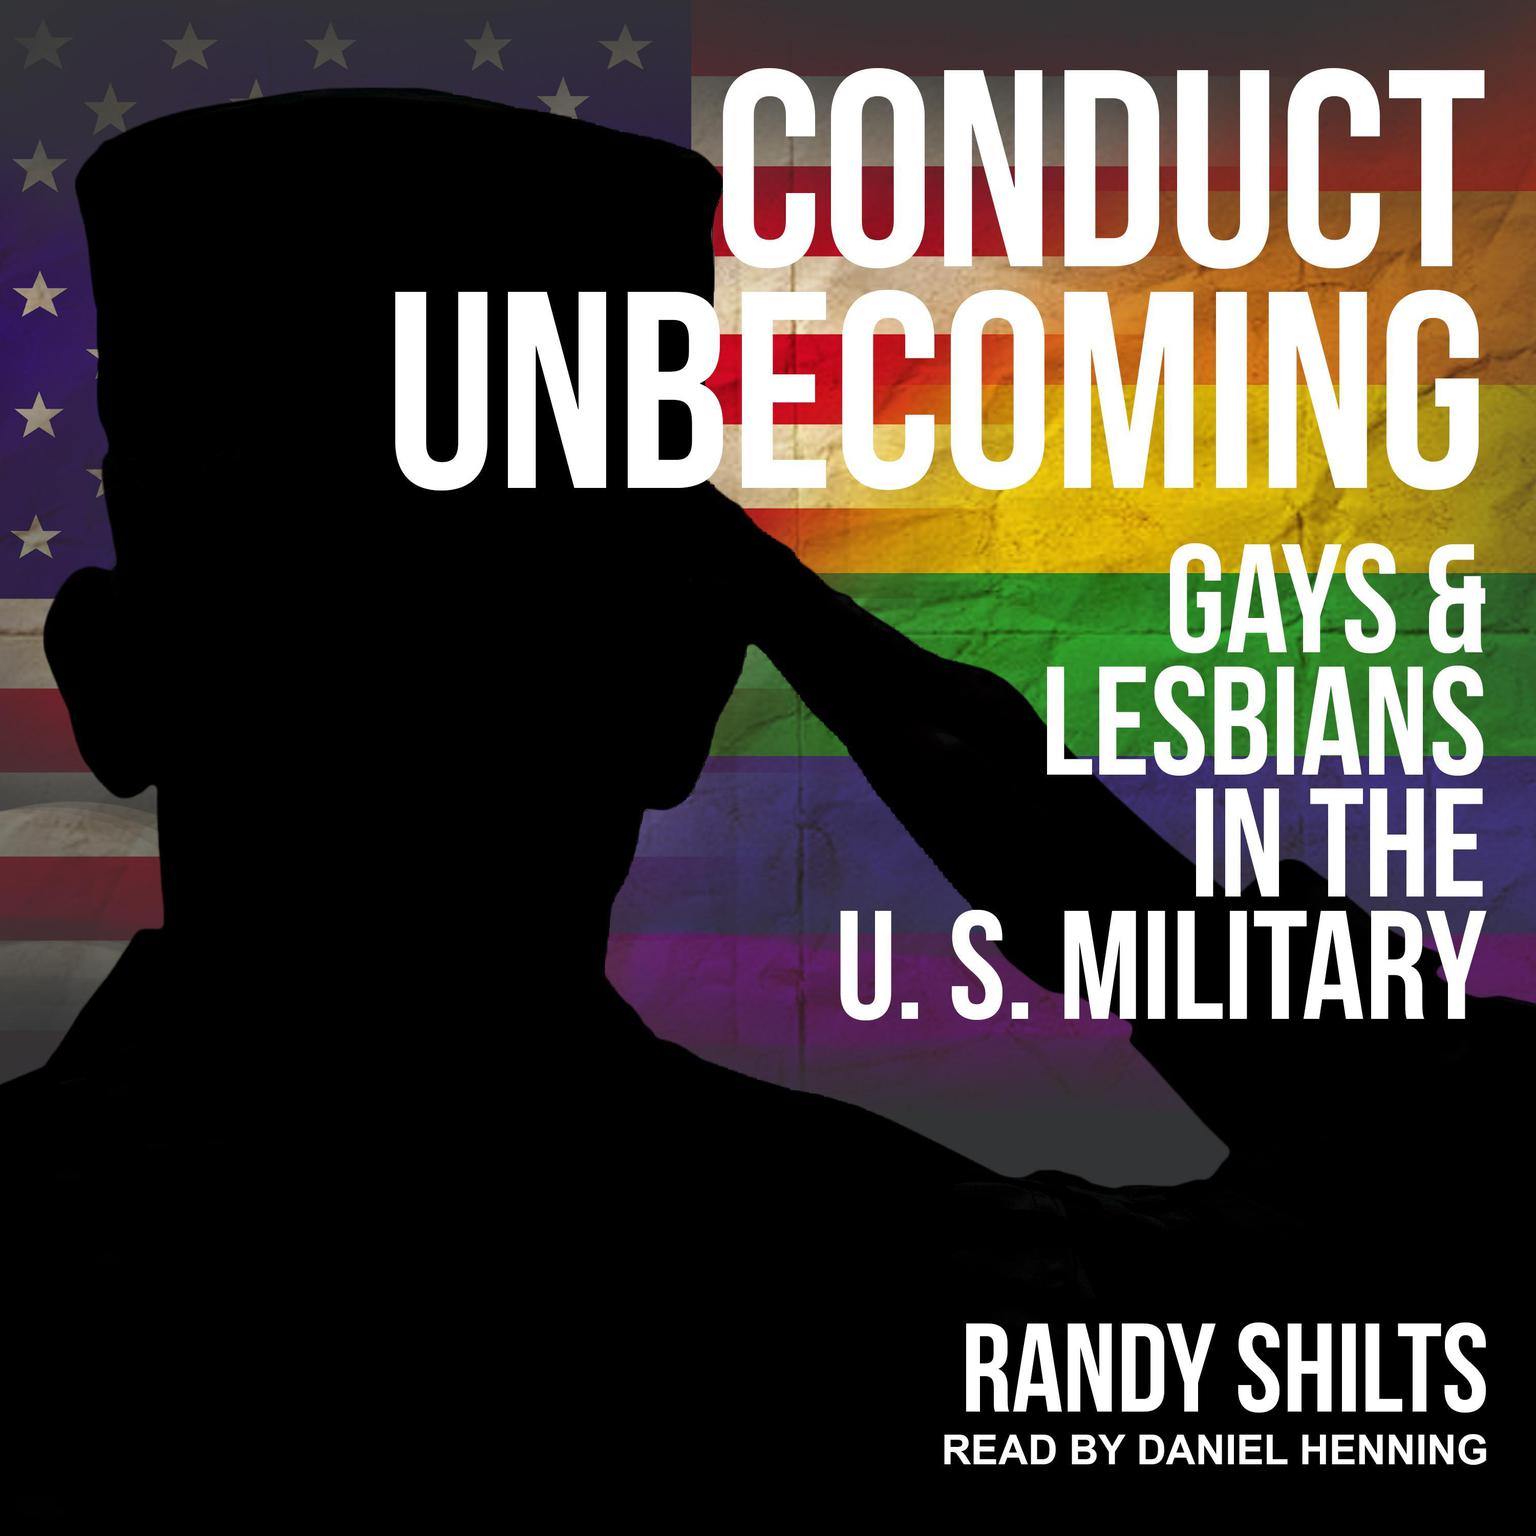 Conduct Unbecoming: Gays & Lesbians in the U.S. Military Audiobook, by Randy Shilts